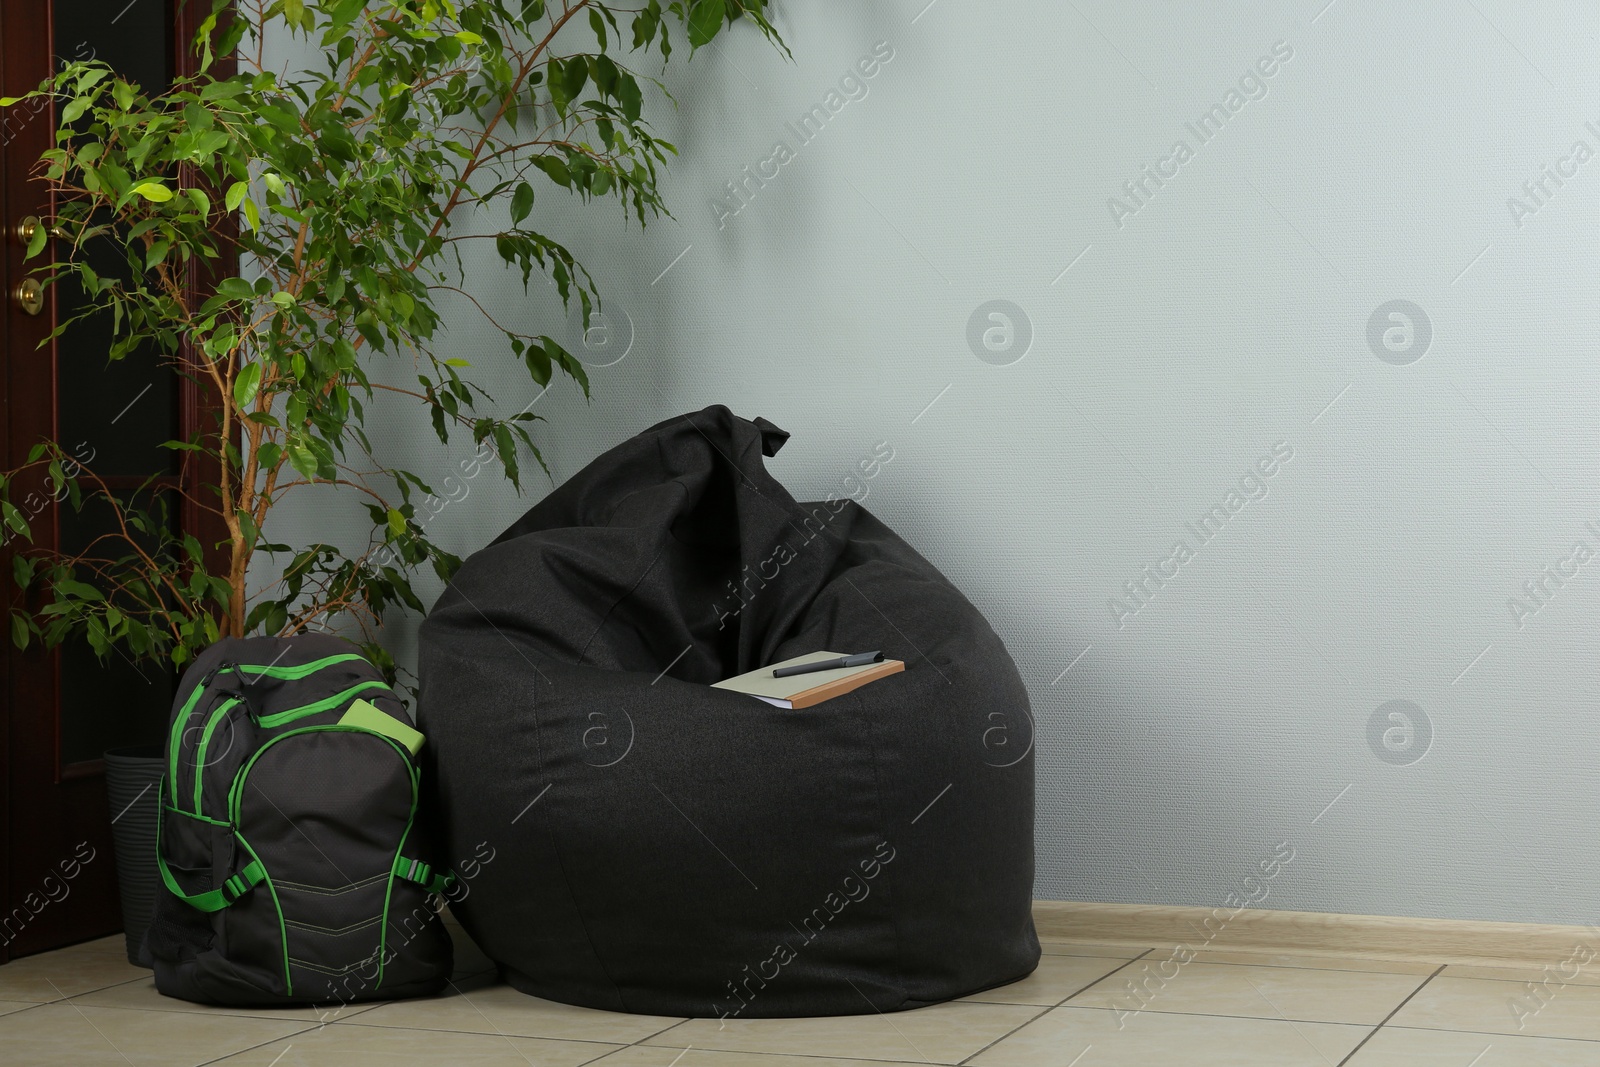 Photo of Black bean bag chair, houseplant and backpack near light grey wall in room. Space for text